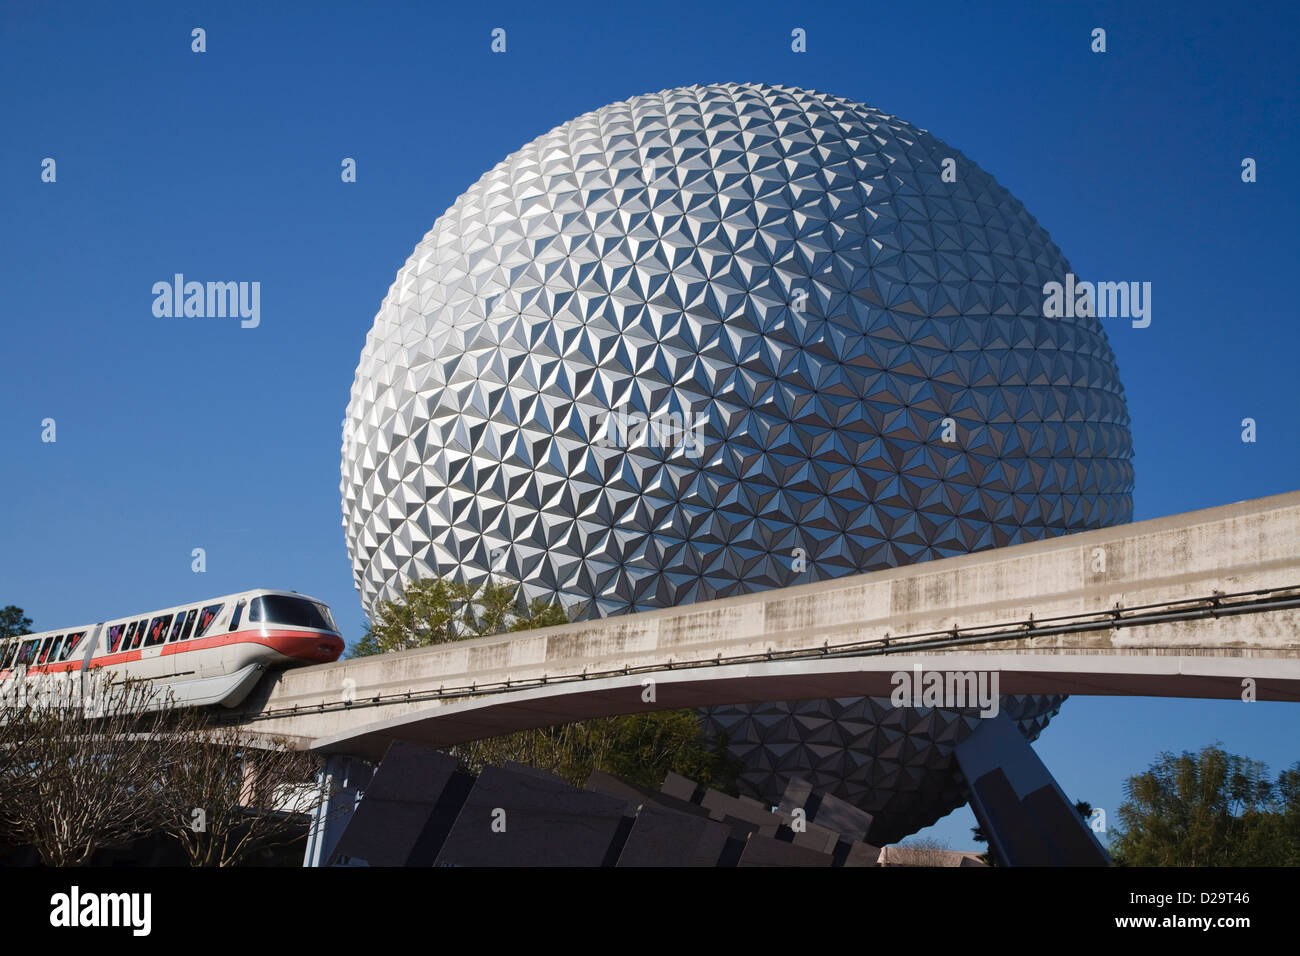 Monorail and Spaceship Earth, the globe at Disney's Epcot centre in Orlando, Florida Stock Photo